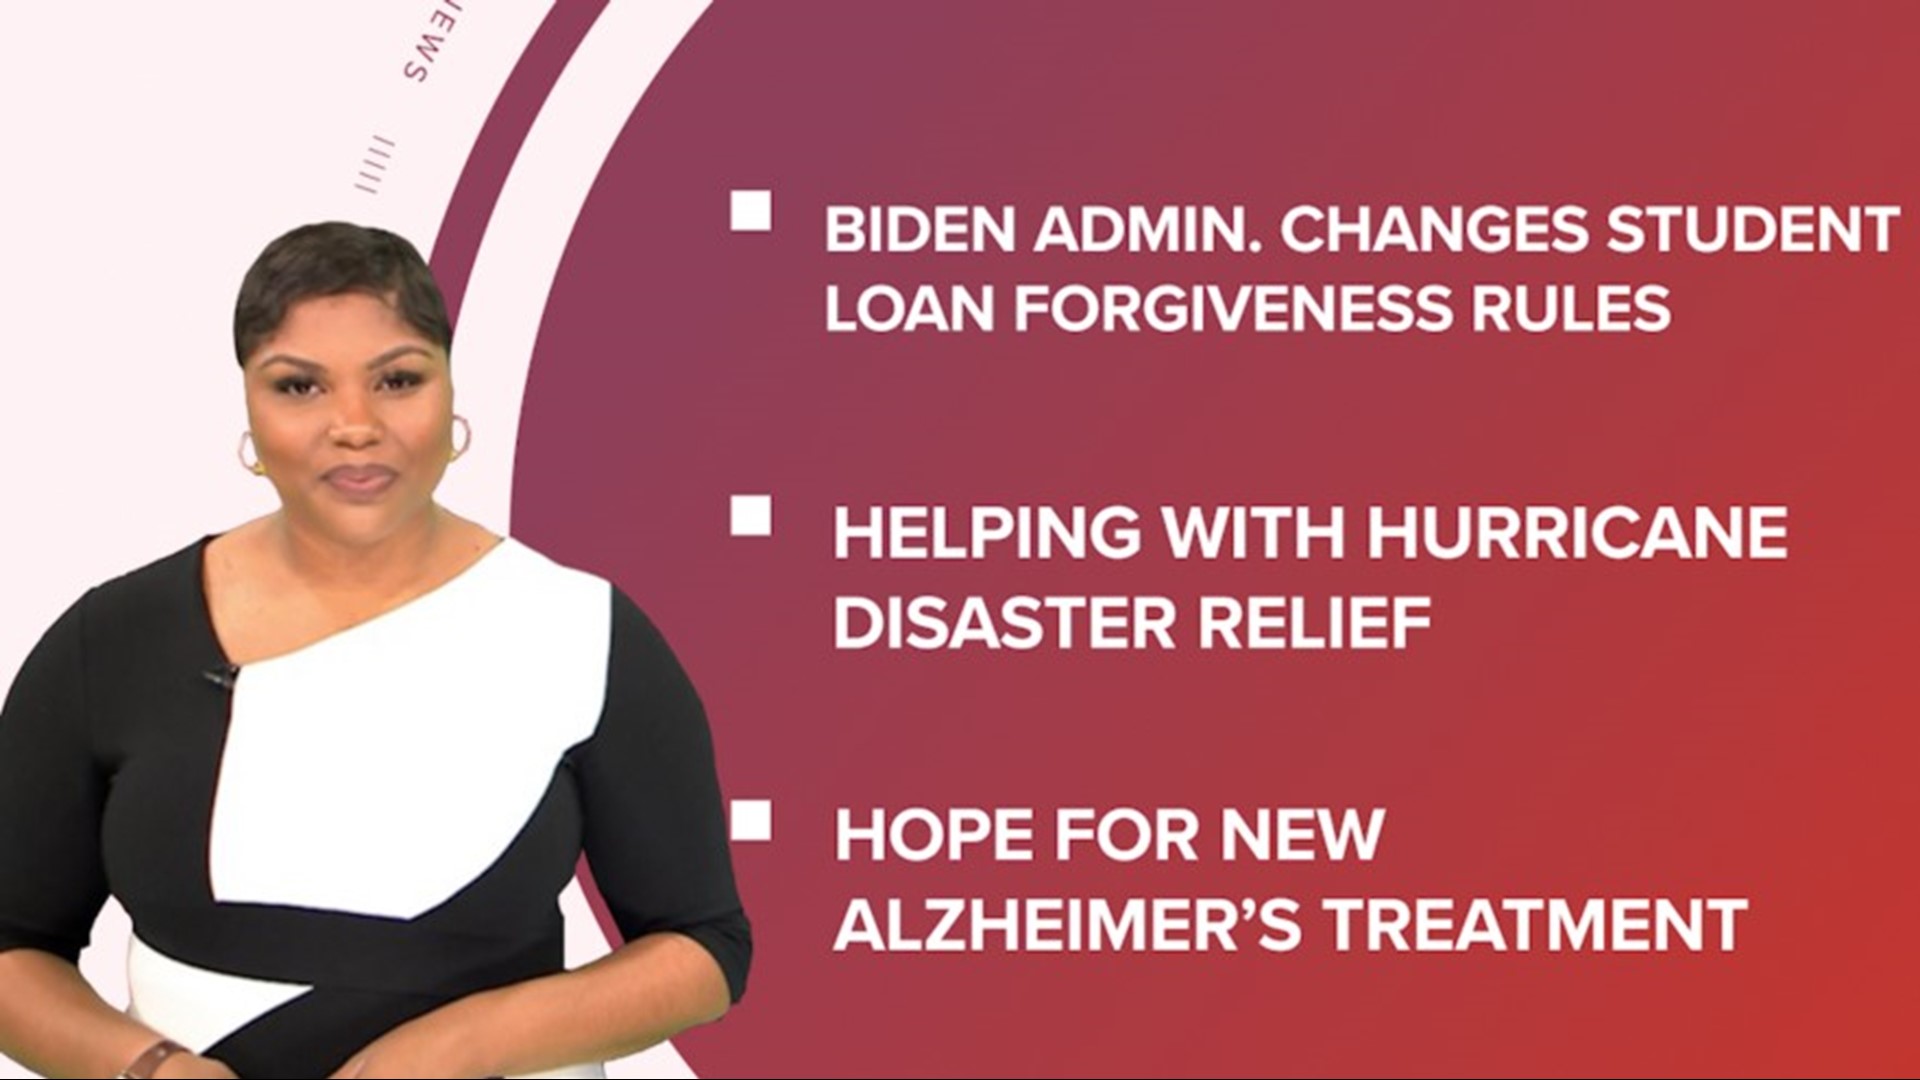 A look at what is happening in the news from how to avoid Hurricane Ian relief scams to changes in the student loan forgiveness plan and a new Alzheimer's treatment.